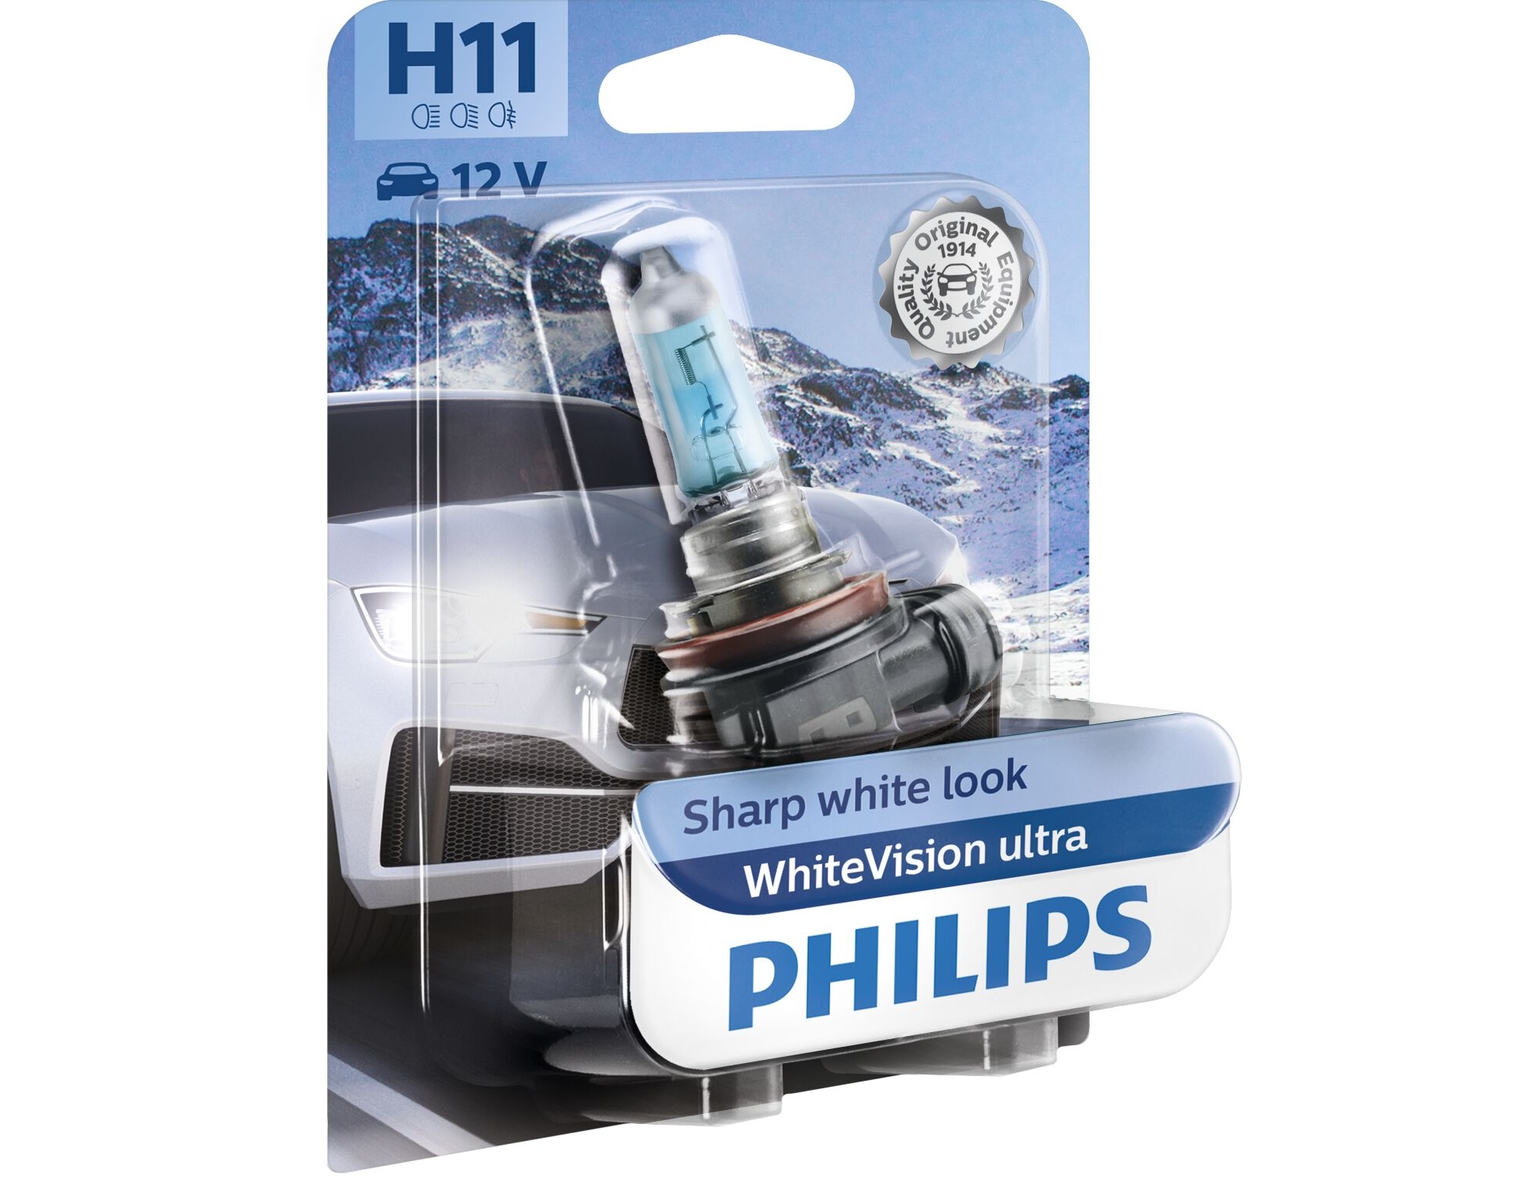 PHILIPS ampoule auto H11 WhiteVision ultra, 12362WVUB1, 12 V 55 W